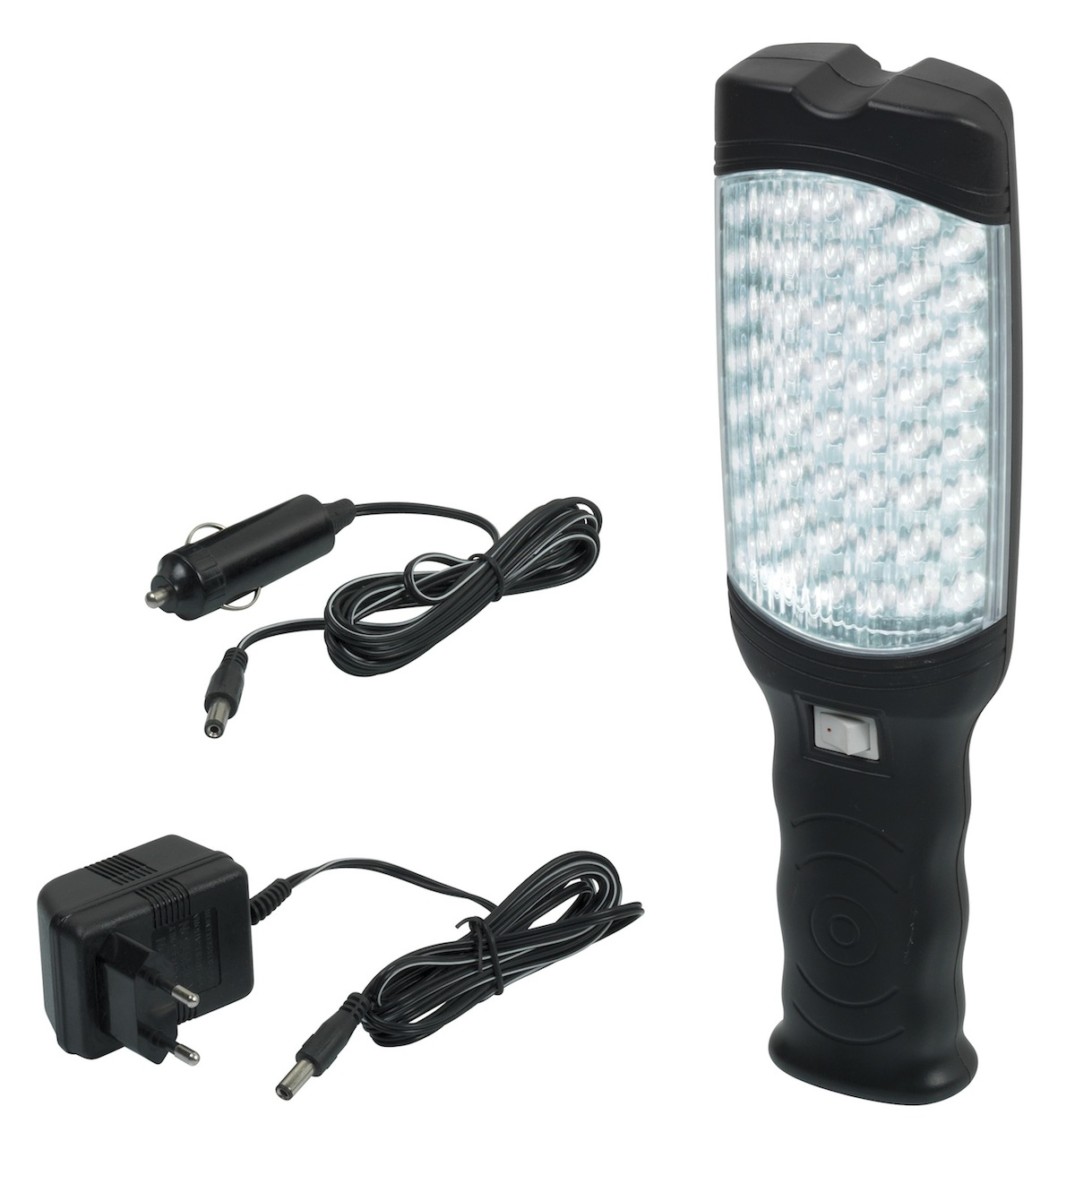 LAMPE BALADEUSE 48 LEDS RECHARGEABLE + ALLUME CIGARES